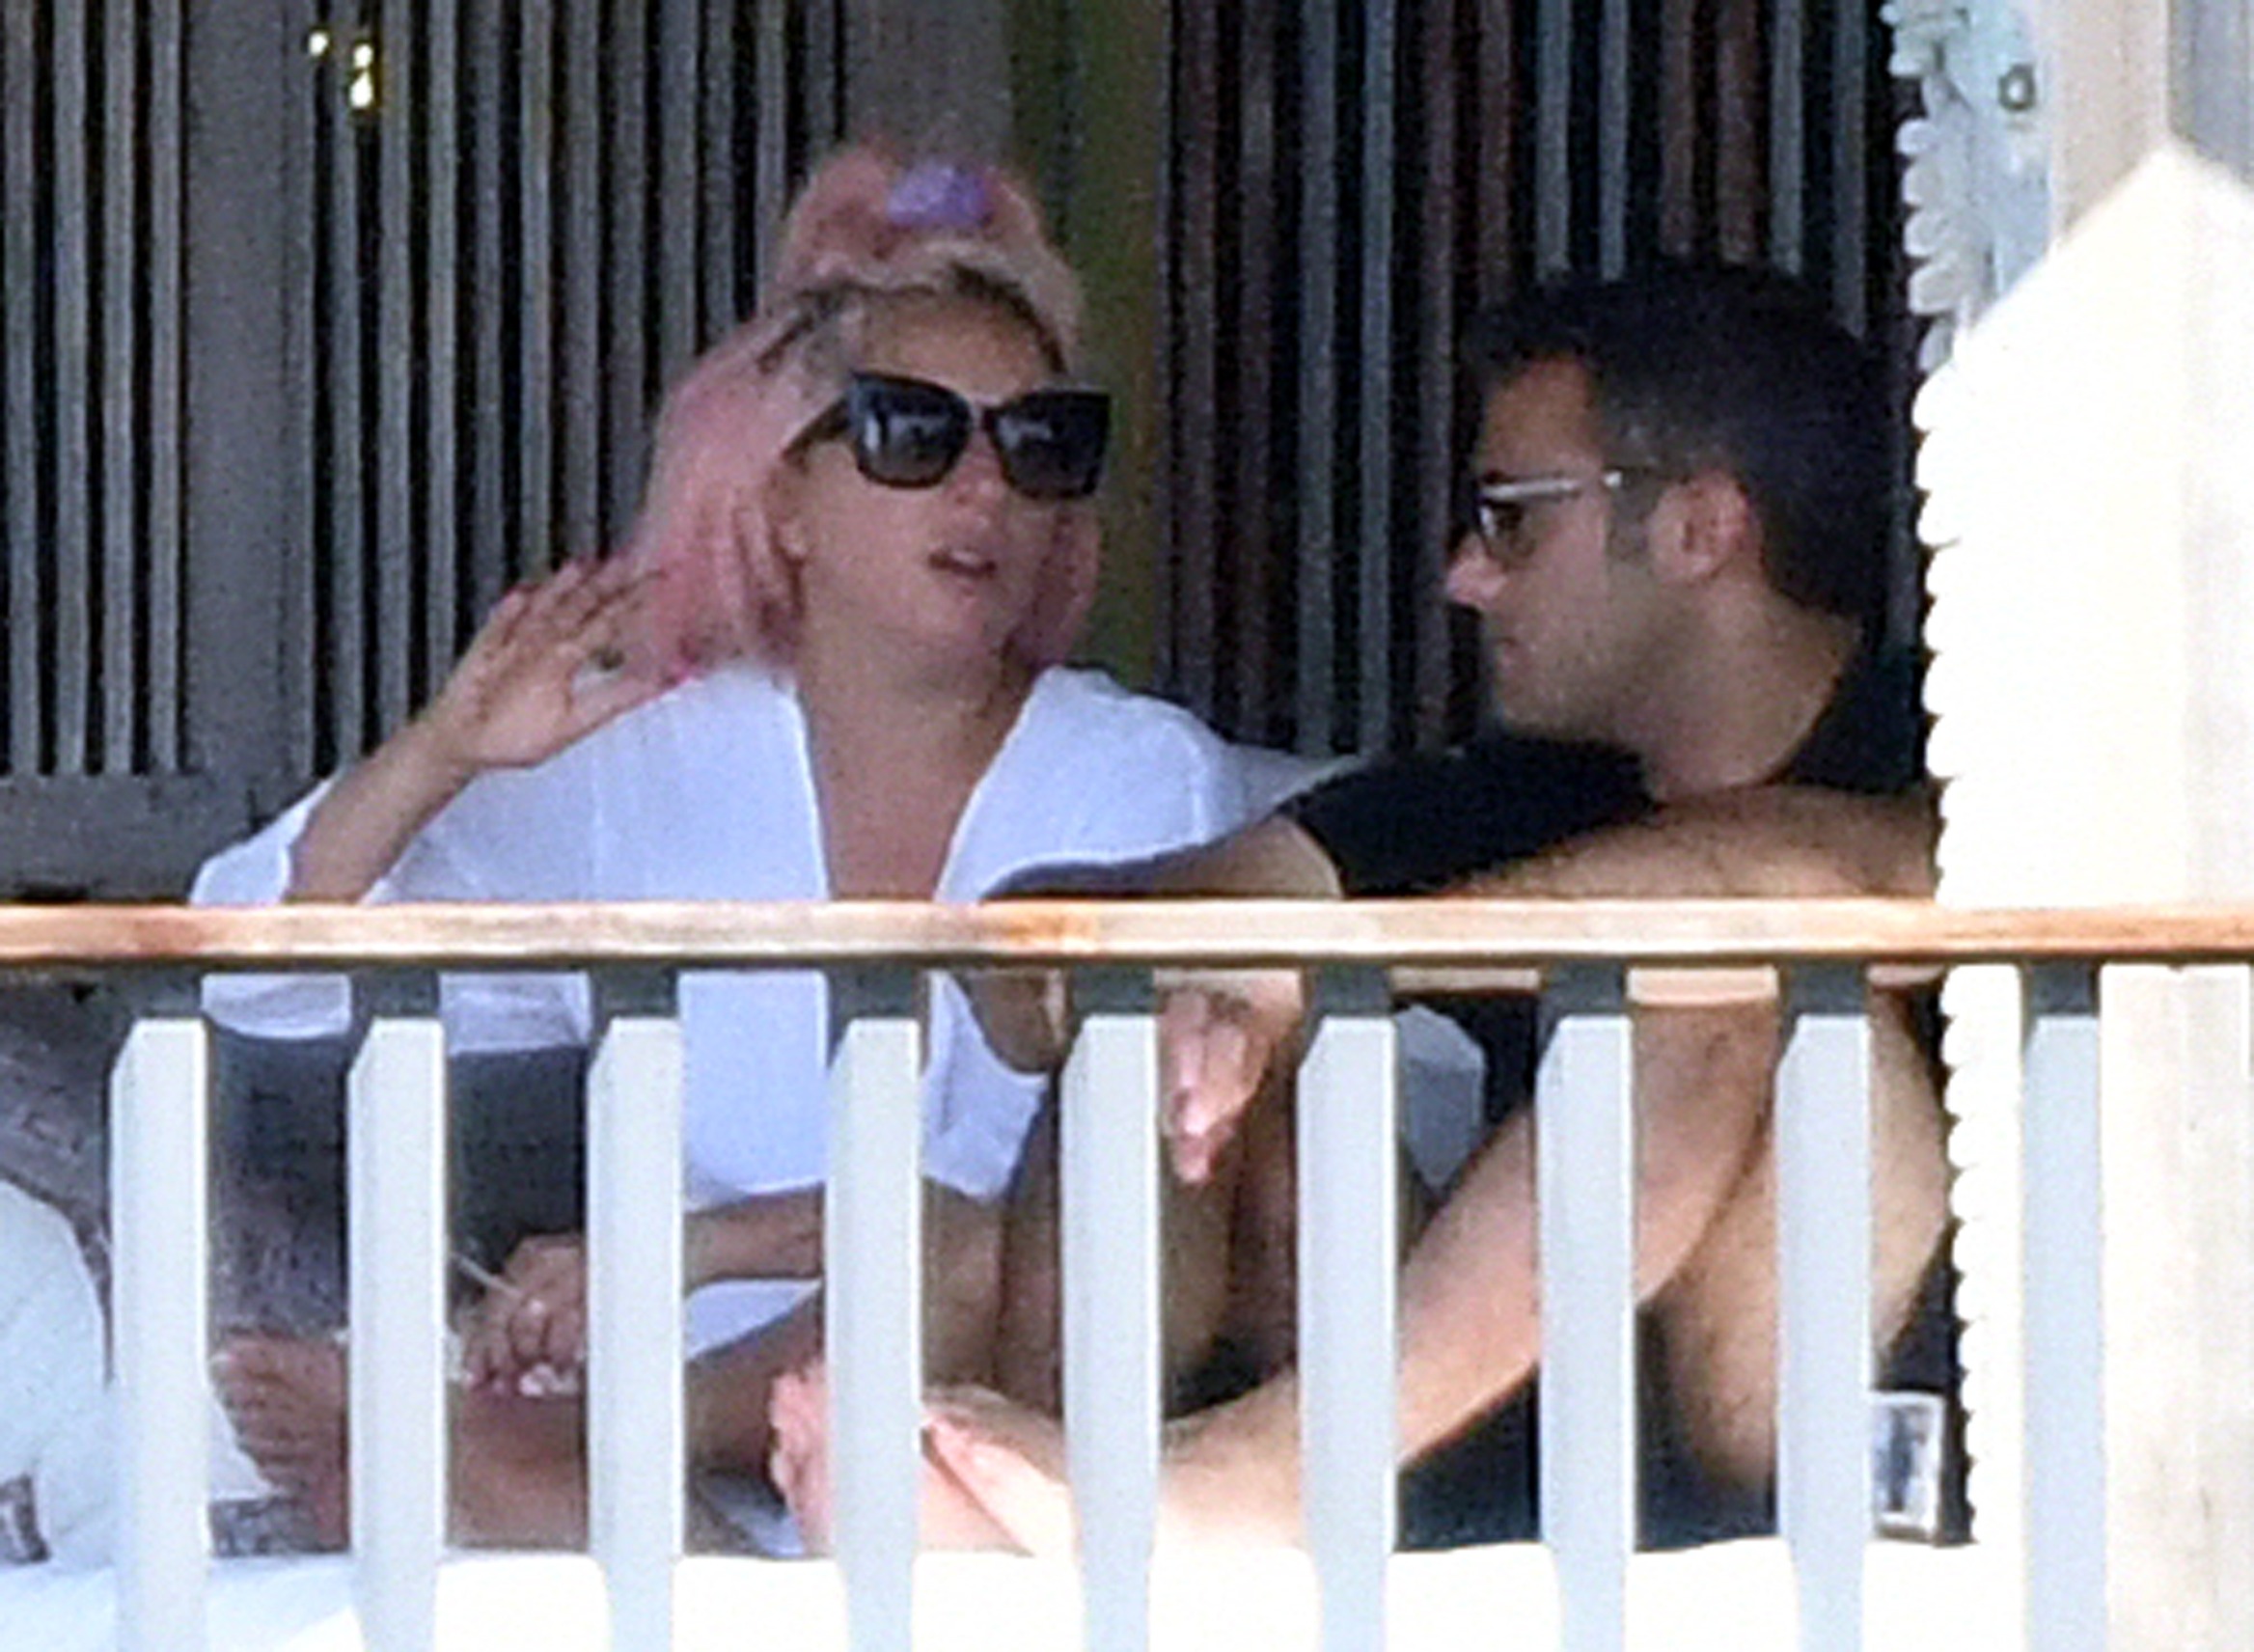 *PREMIUM EXCLUSIVE NO WEB UNTIL 2130 EST 2ND FEB* Lady Gaga seen kissing a mystery man as she relaxes in Miami ahead of her pre Super Bowl concert on Saturday. Gaga looked sensational as she chilled out wearing a black thong bikini whilst cuddling up to her new man. It is not known if her hunky companion is the same man the 33-year-old beauty was spotted sharing a midnight kiss with in Las Vegas over the New Year holiday. Gaga ended her engagement from talent agent, Christian Carino, 51, in February 2019. The pair began dating in 2017 and got engaged in October 2018.
30 Jan 2020, Image: 496030377, License: Rights-managed, Restrictions: World Rights, Model Release: no, Credit line: MEGA / The Mega Agency / Profimedia